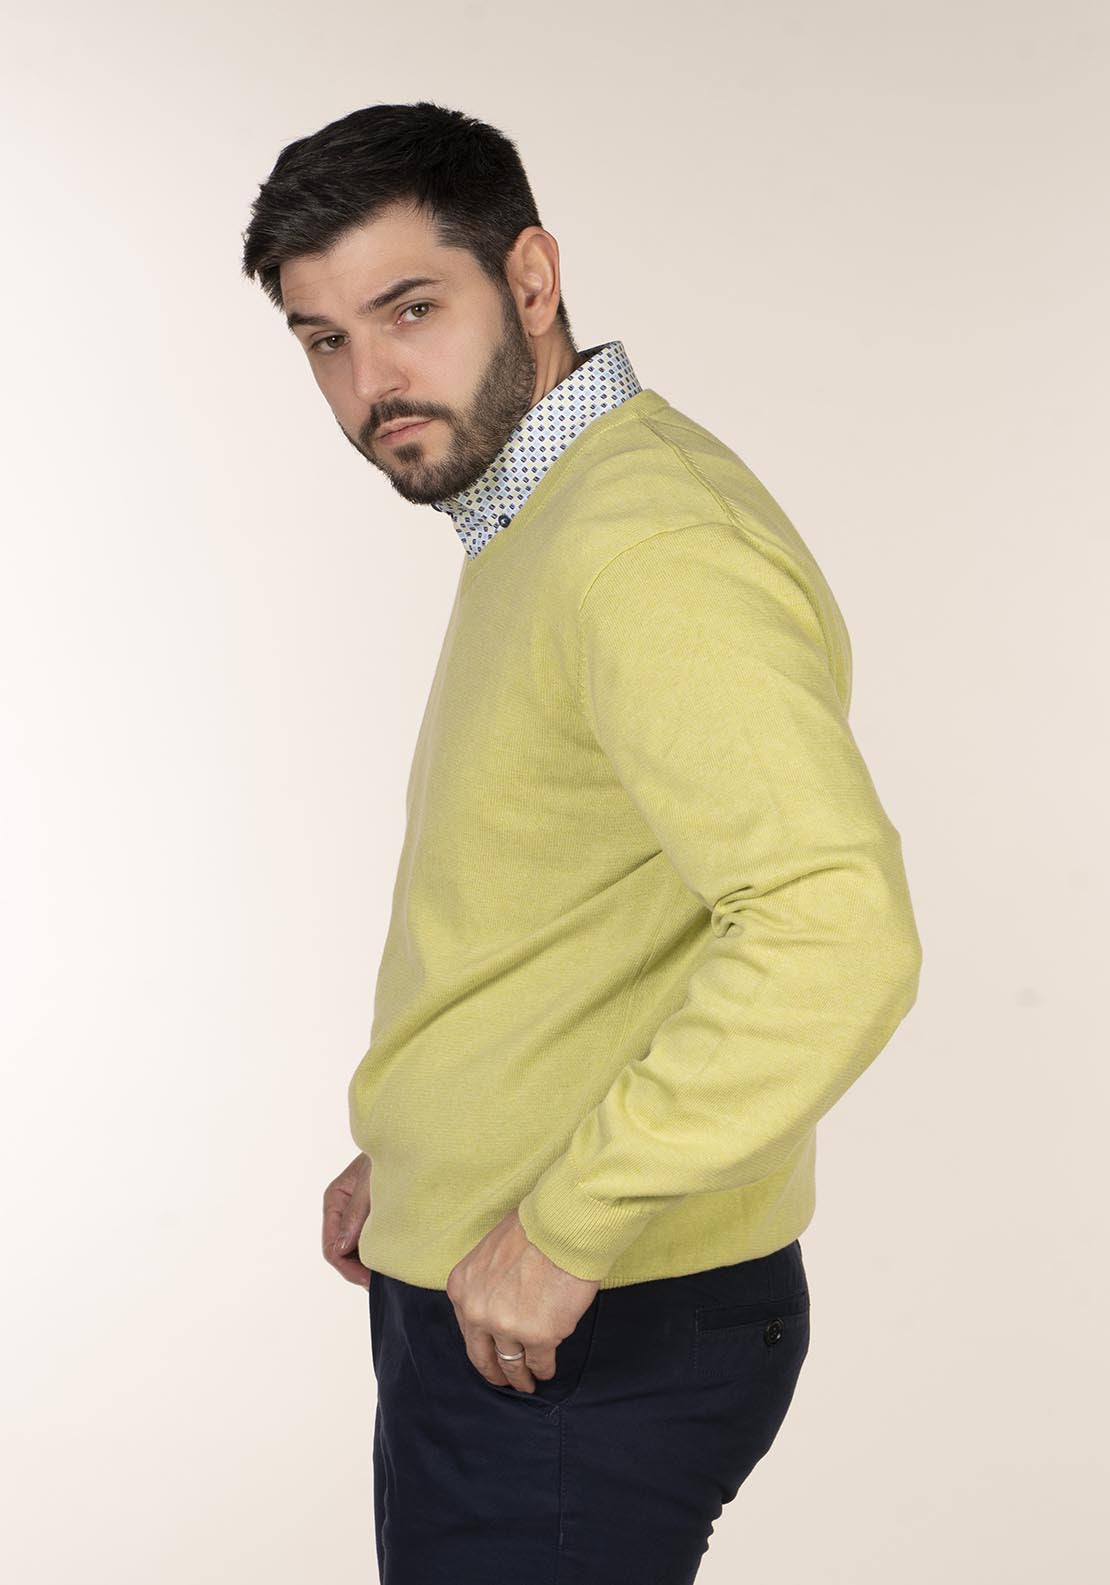 Yeats Plain Cotton V Neck Sweaters 4 Shaws Department Stores